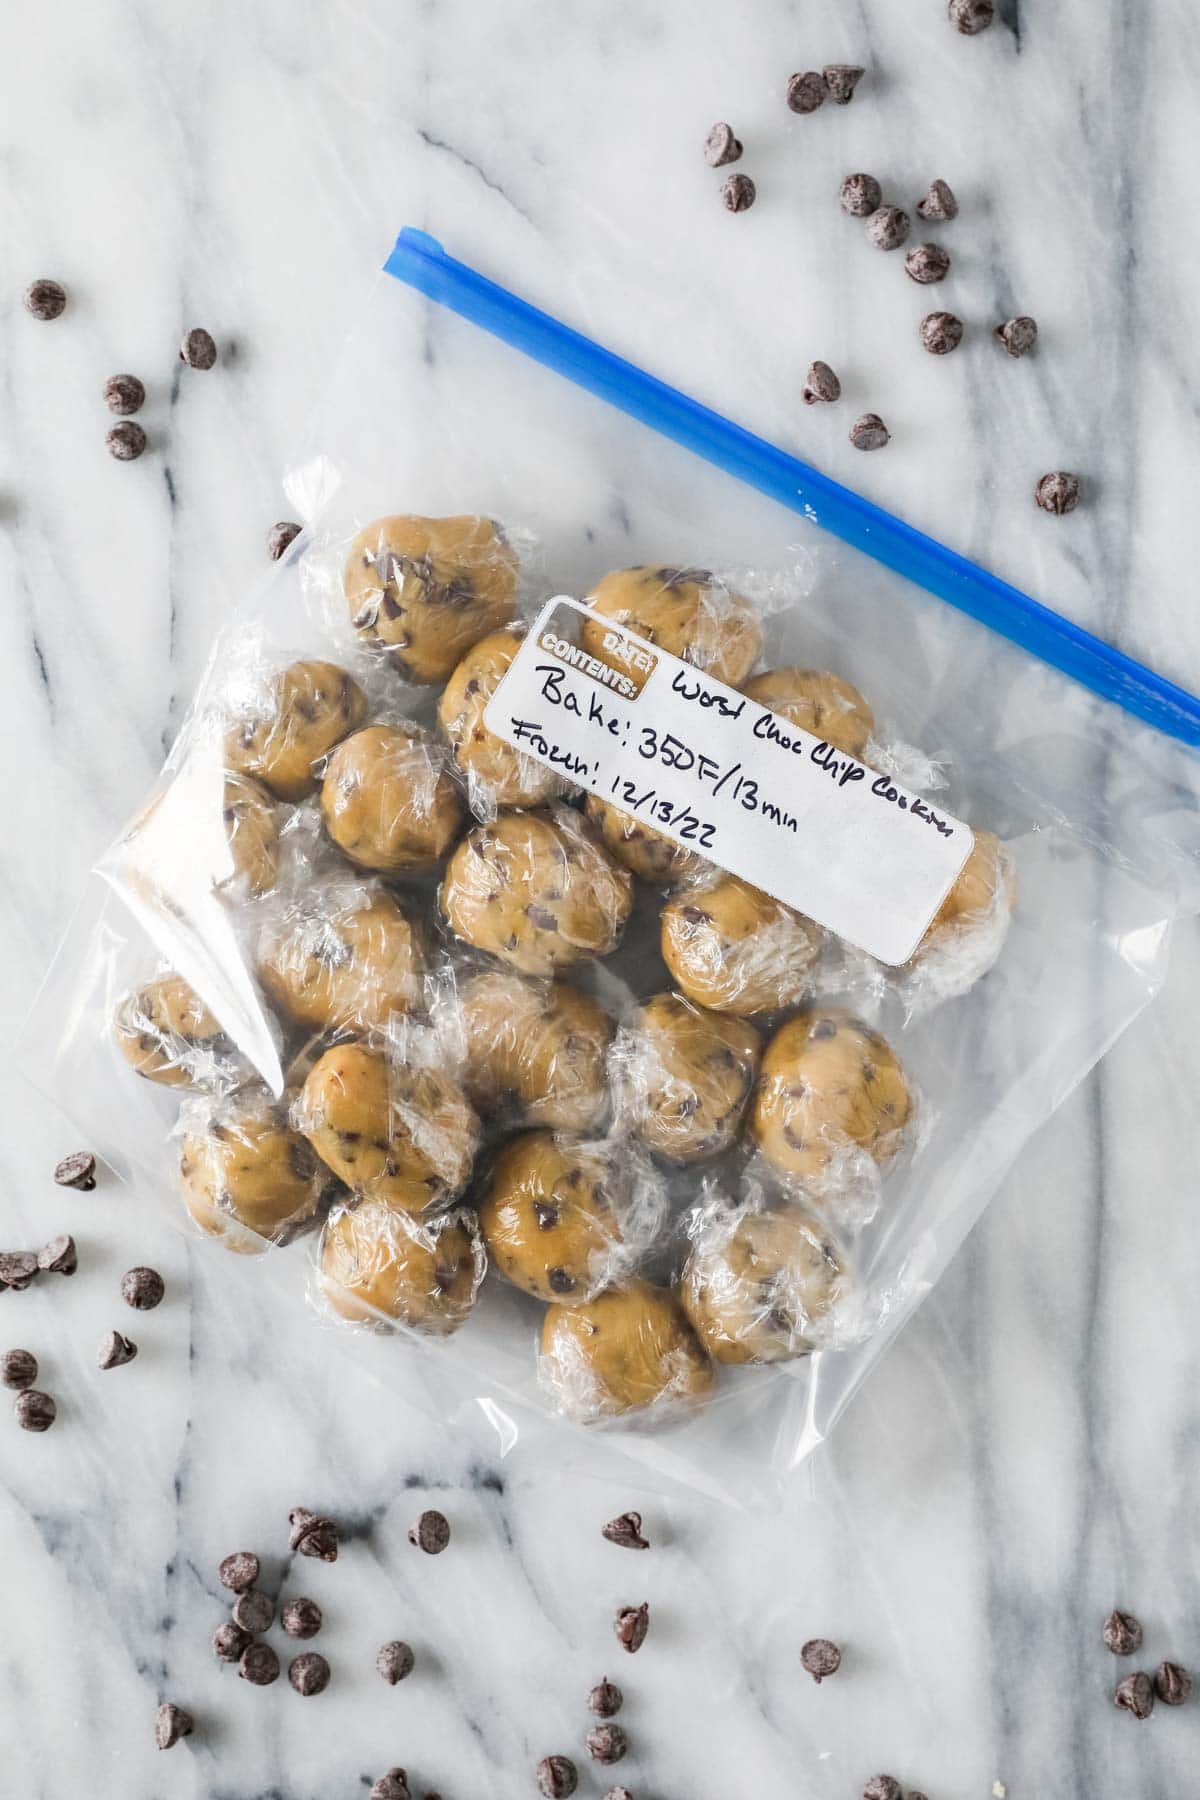 Ziploc bag of cookie dough balls that have been wrapped in plastic in preparation for freezing.